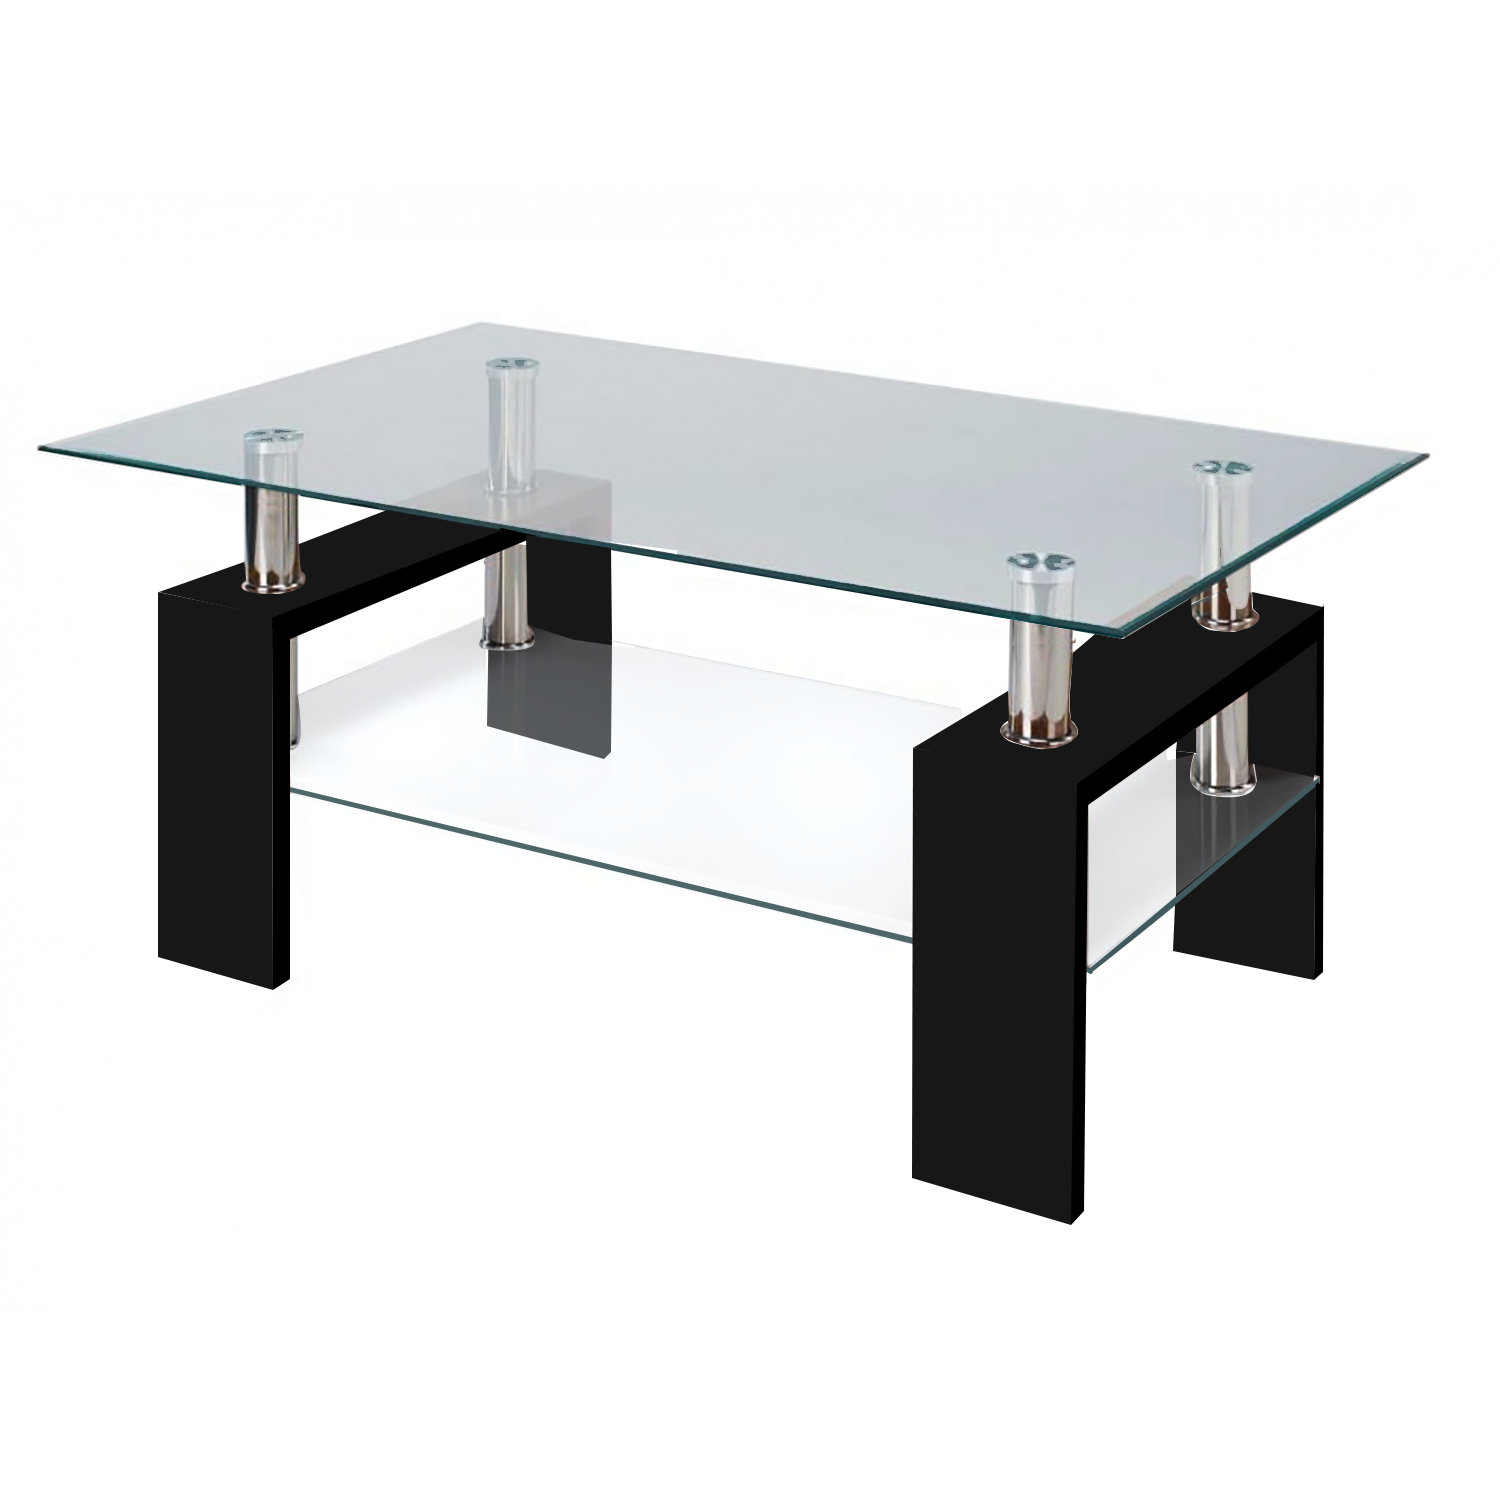 Glass table modern glass black coffee table with shelf contemporary living room WFZNYNO